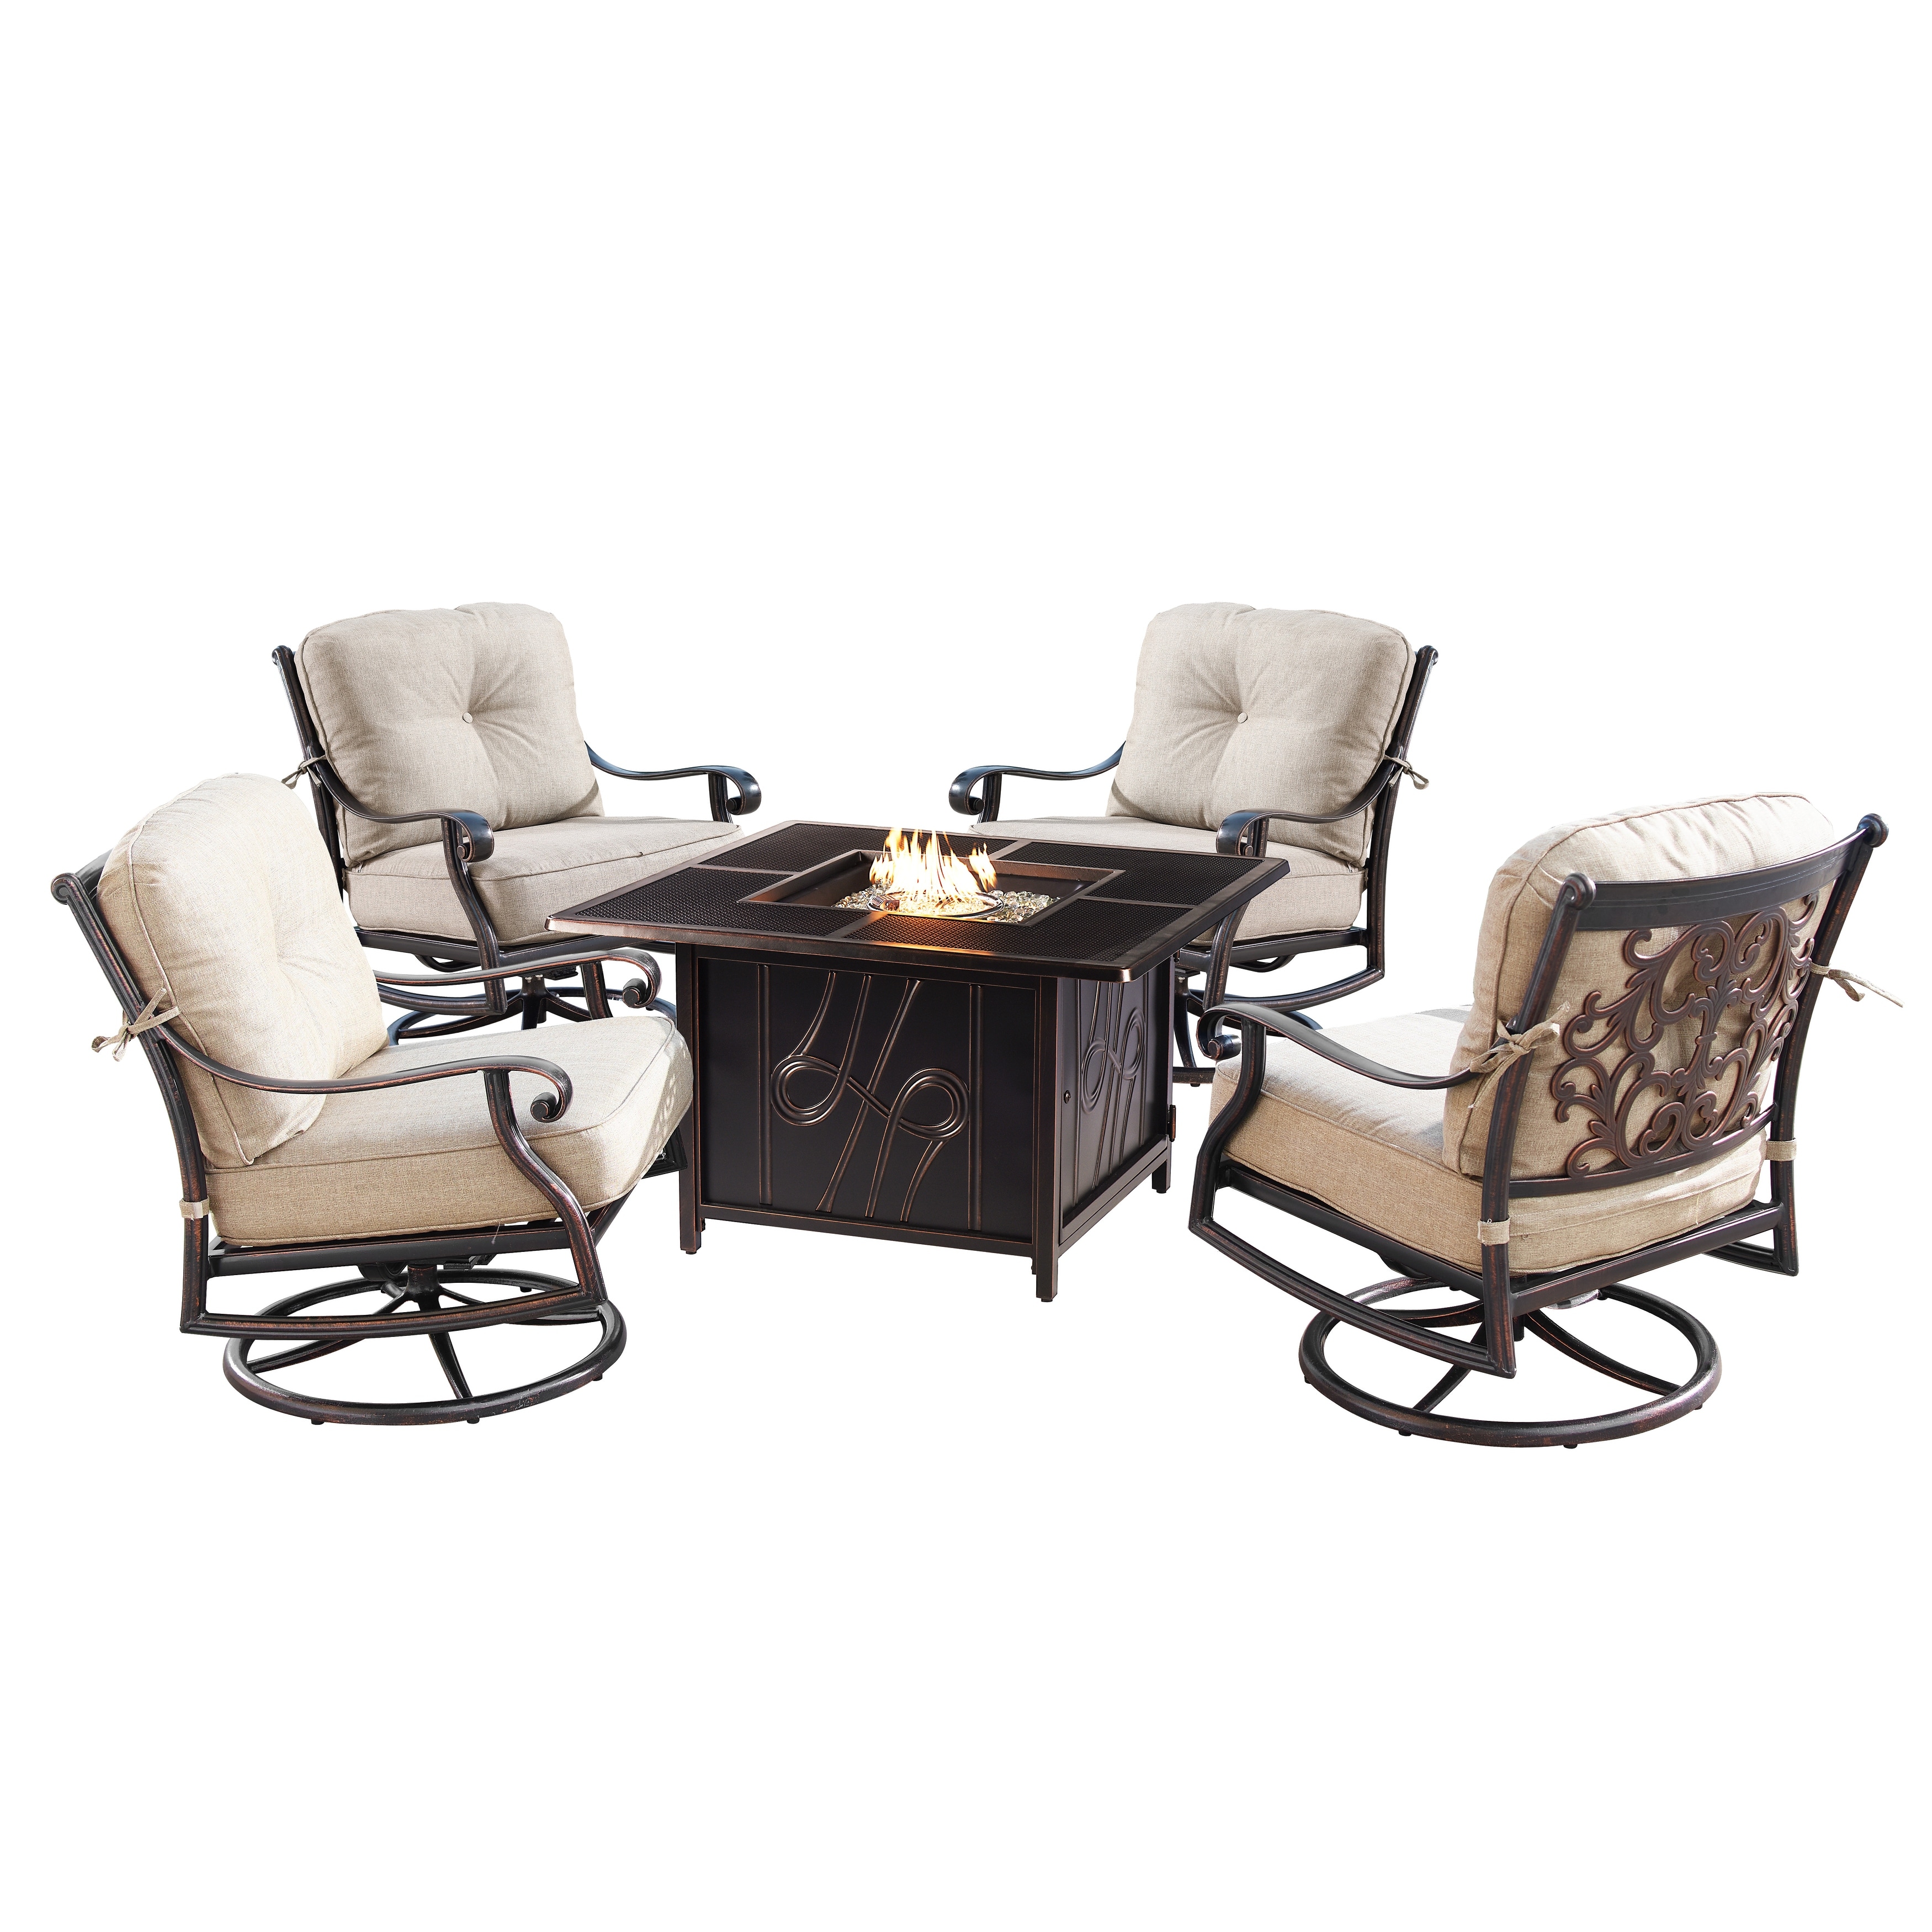 Outdoor Aluminum 42 In. Square Fire Table Set With Four Deep Seating Swivel Rocking Chairs and Accessories